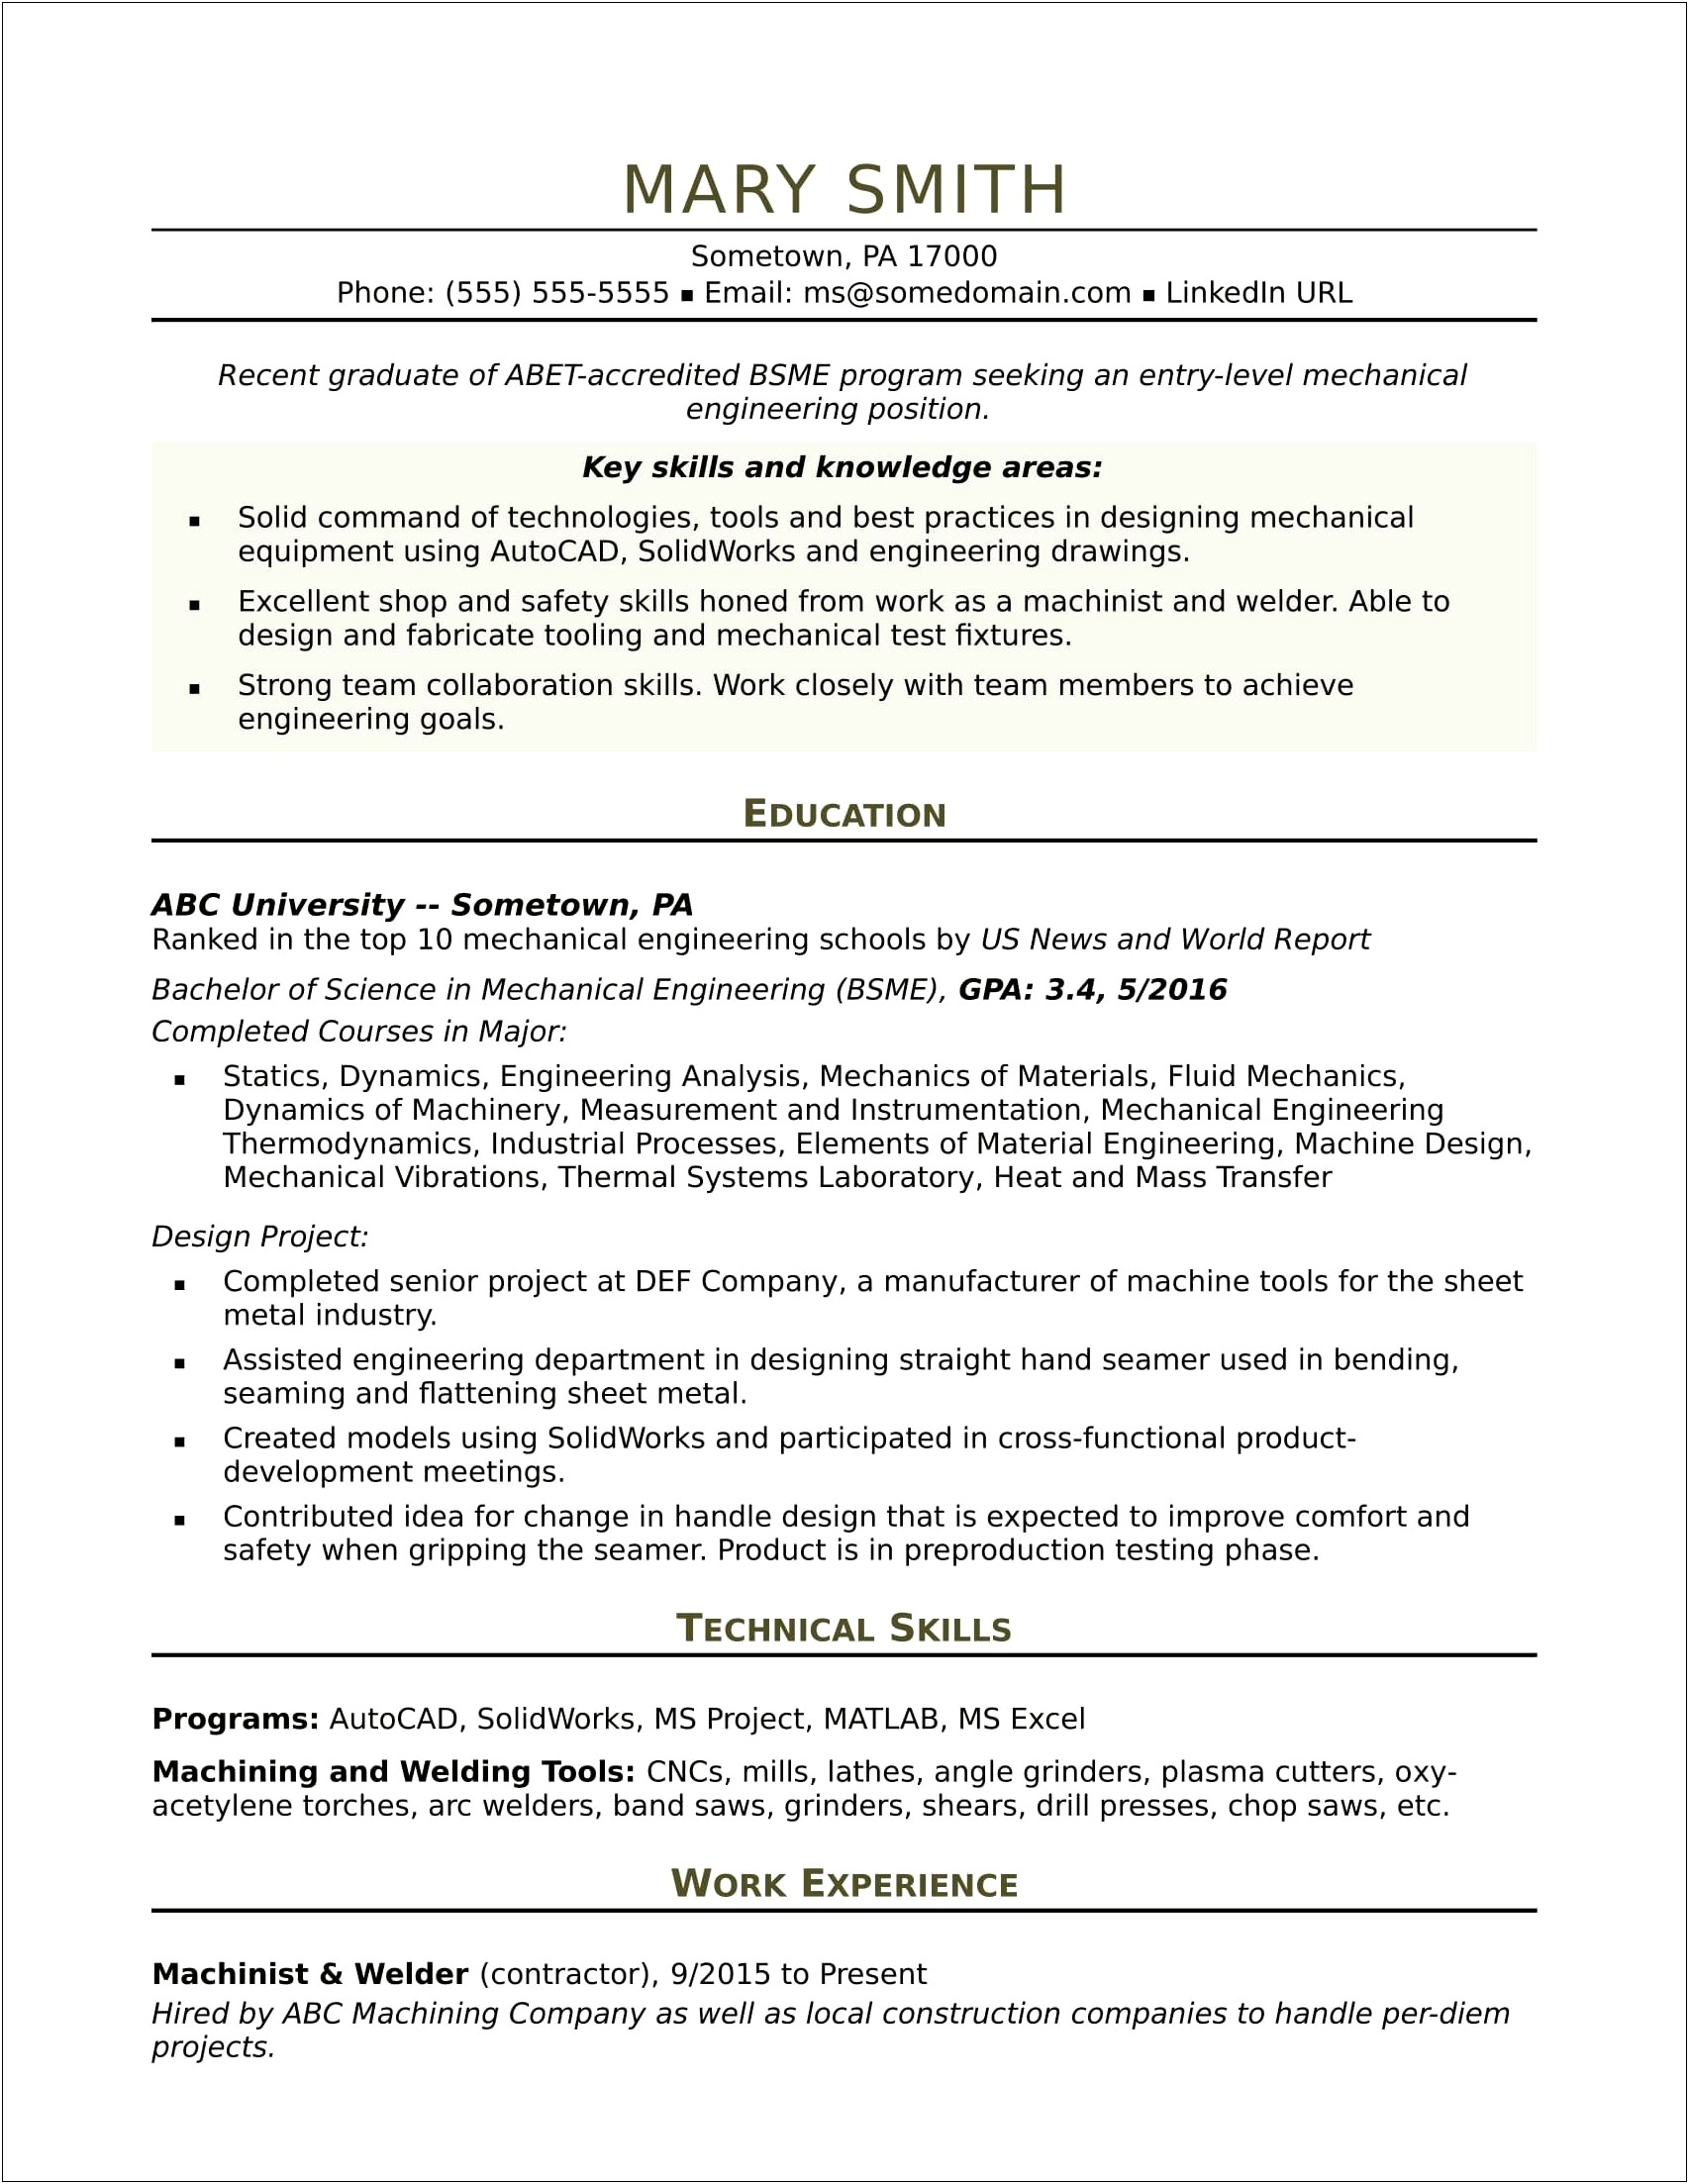 Resume Entry For Working At A Store